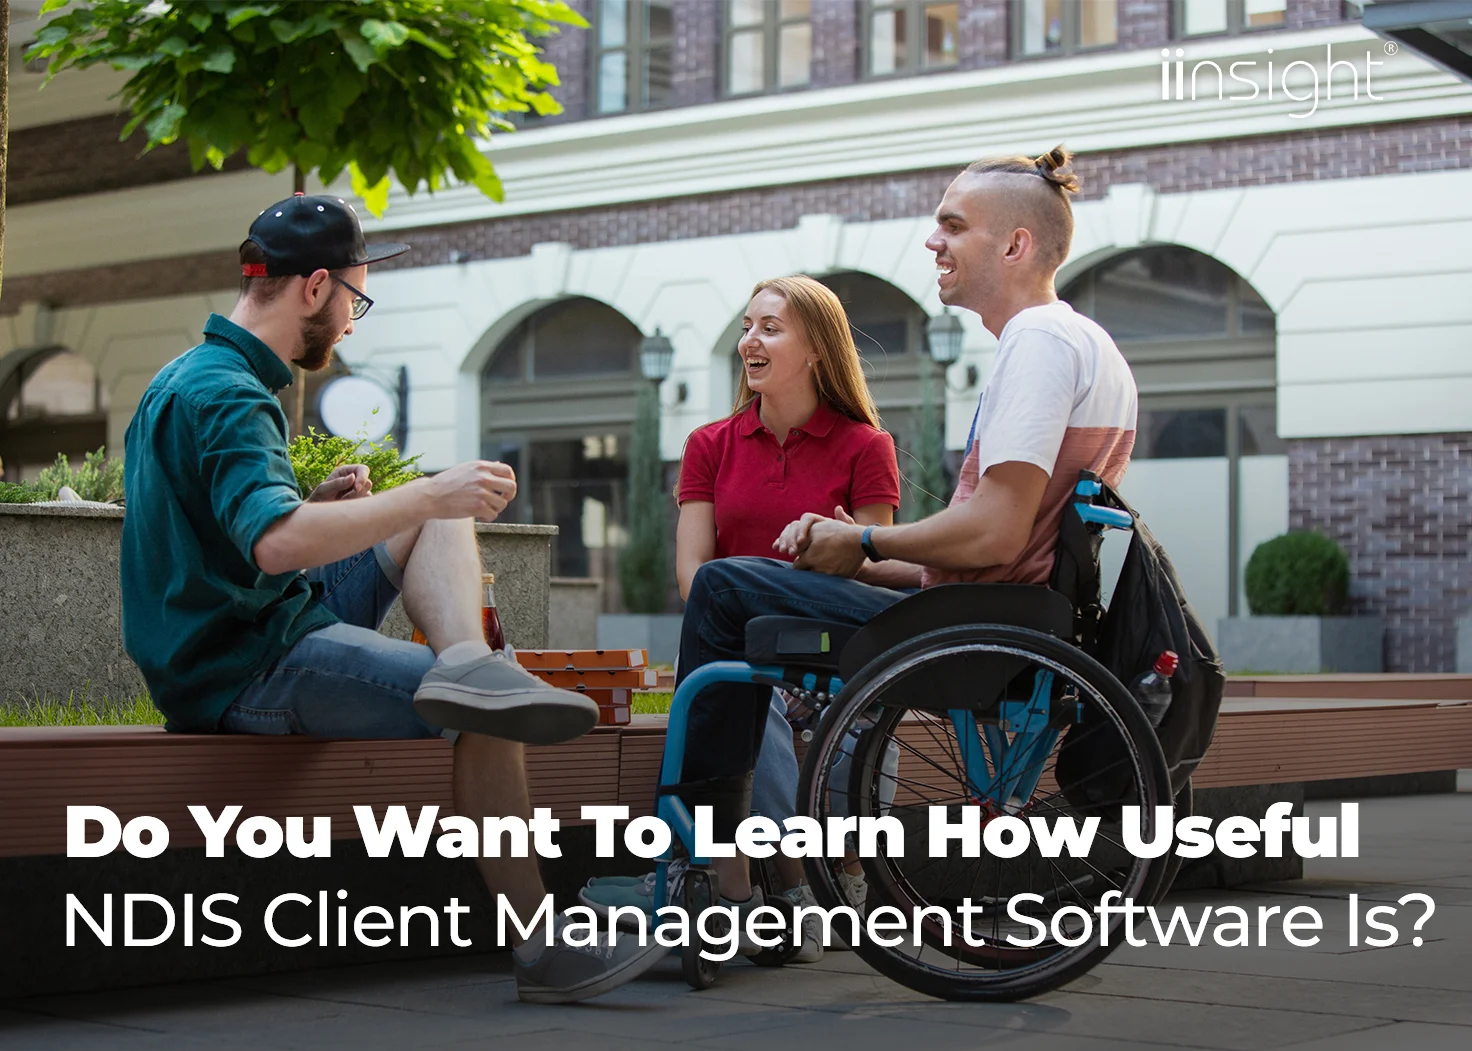 Do You Want to Learn How Useful NDIS Client Management Software Is?